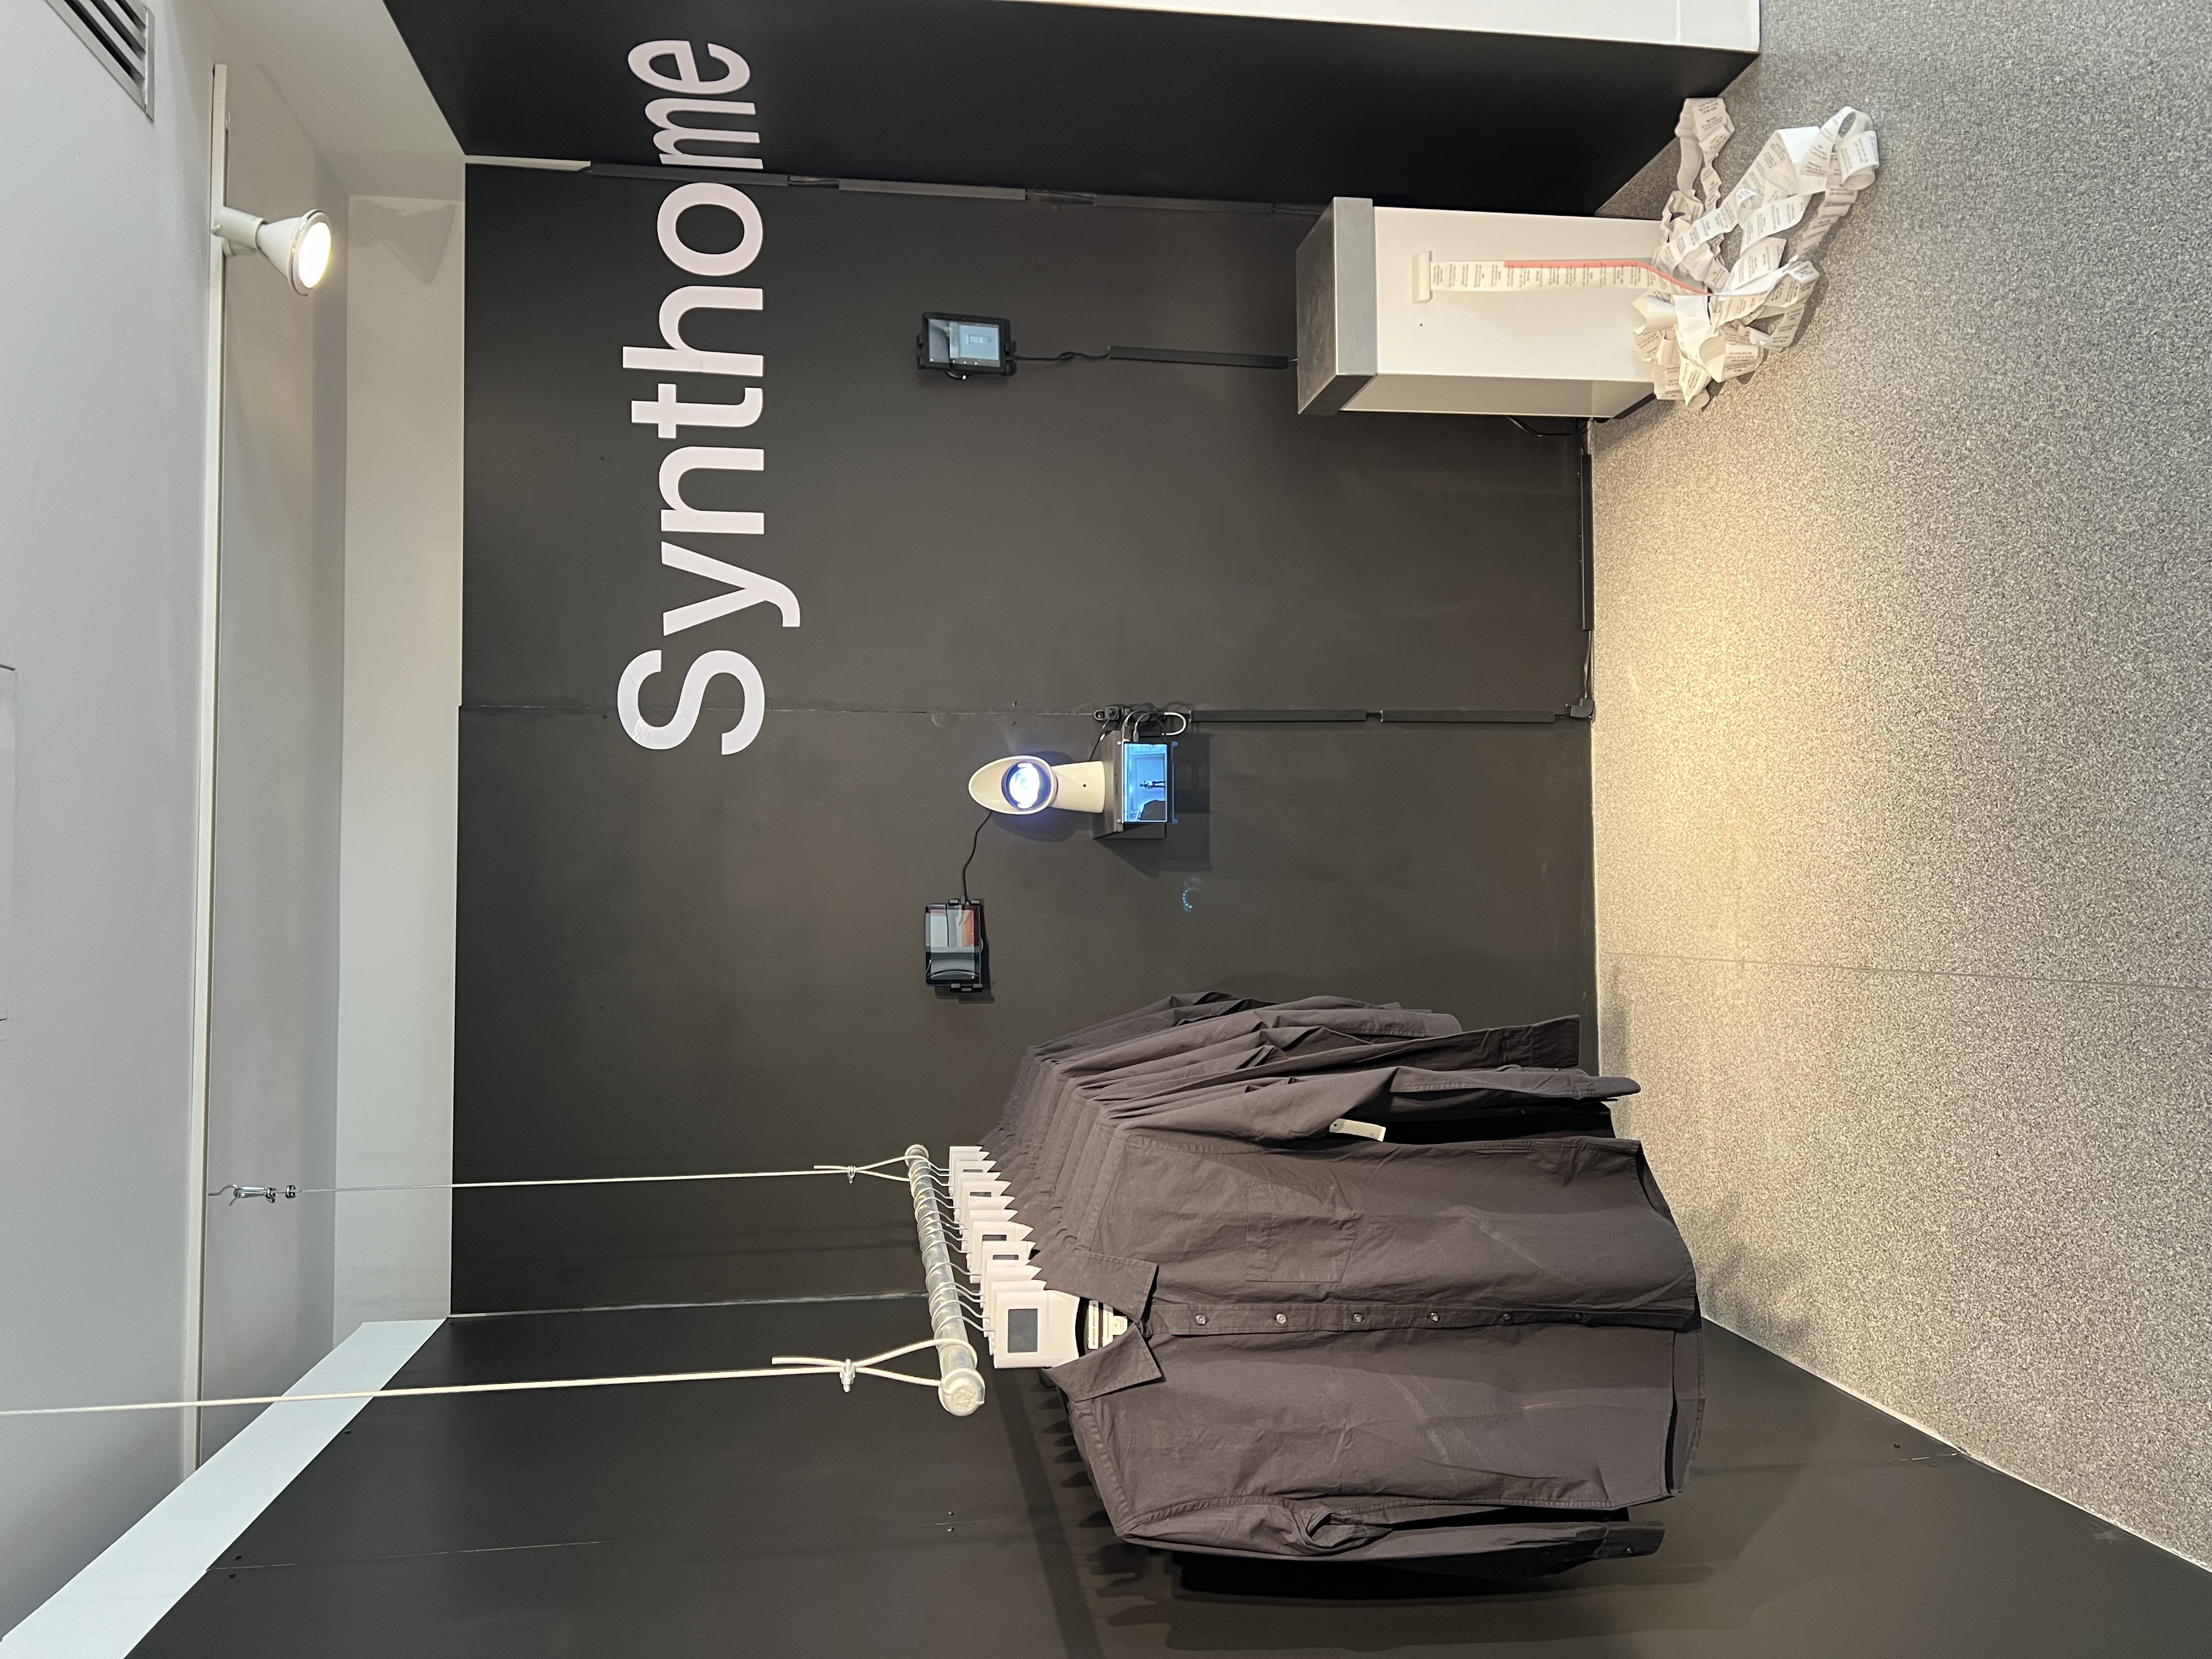 Exhibit that reads 'Synthome' and has T-shirts on a coat hanger and a trash can.